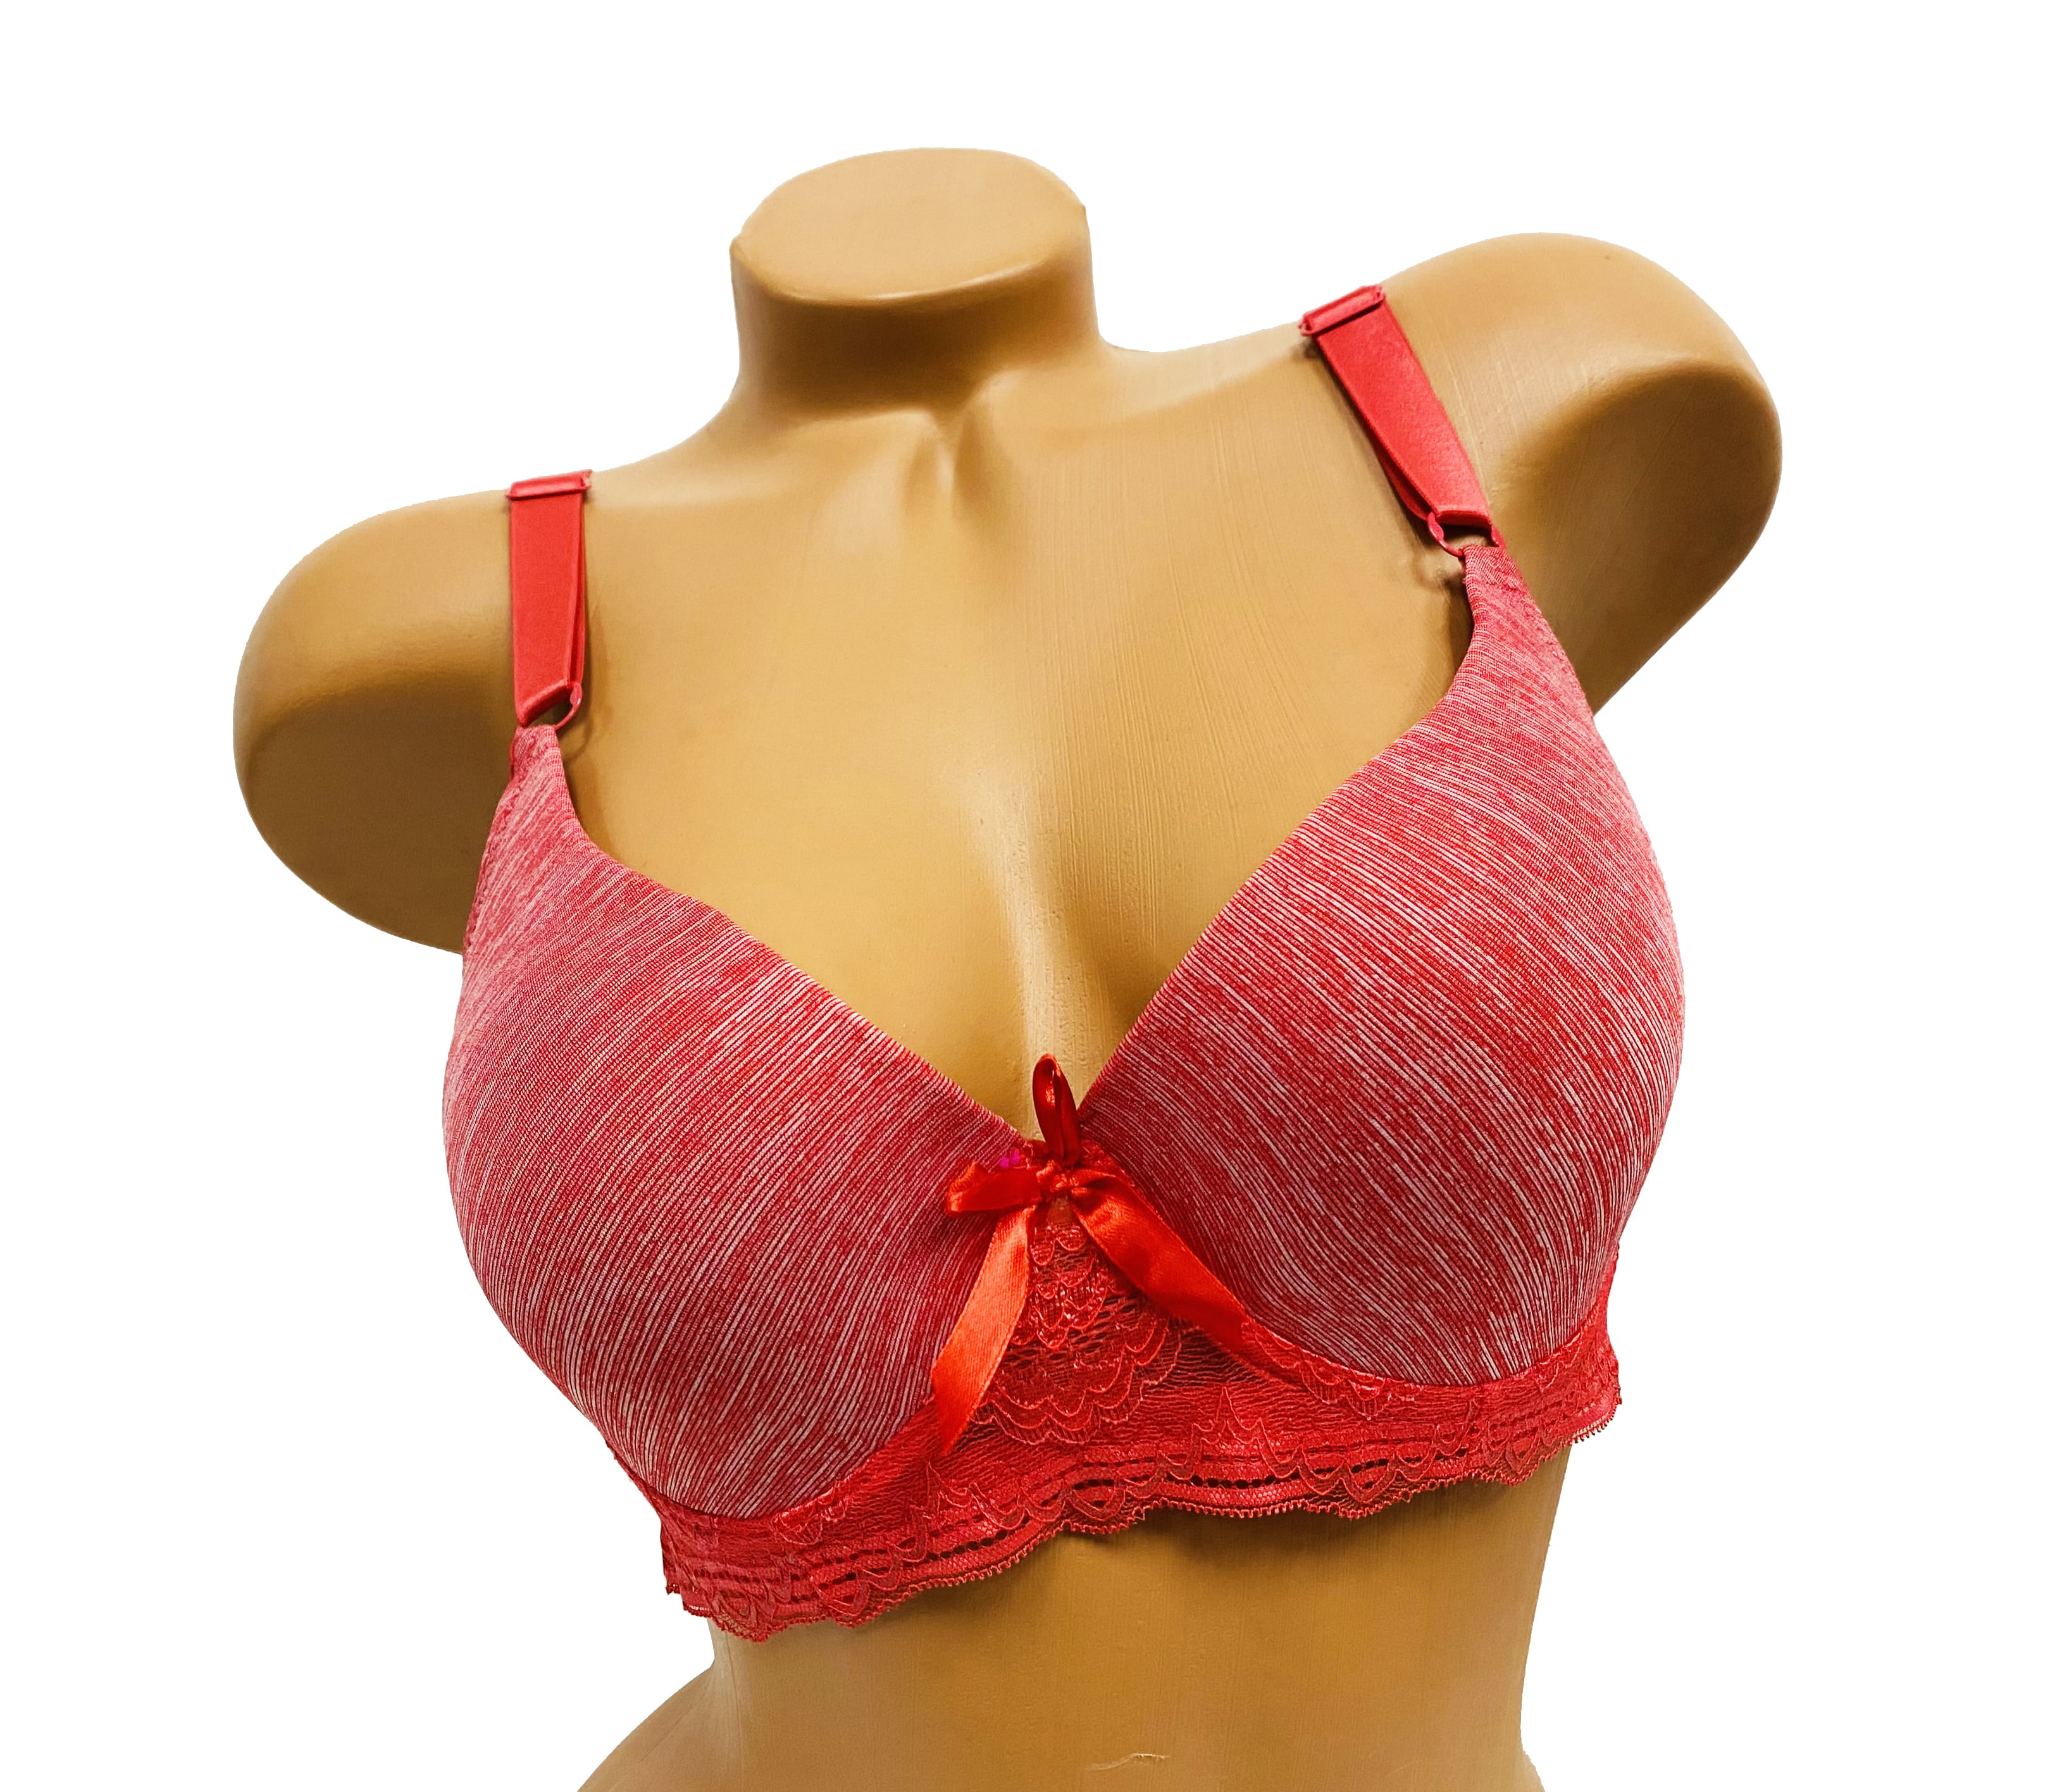 Shop Bras Made in Canada, Cup Sizes K to Z Bands 24+ DDDD+ Big Cup